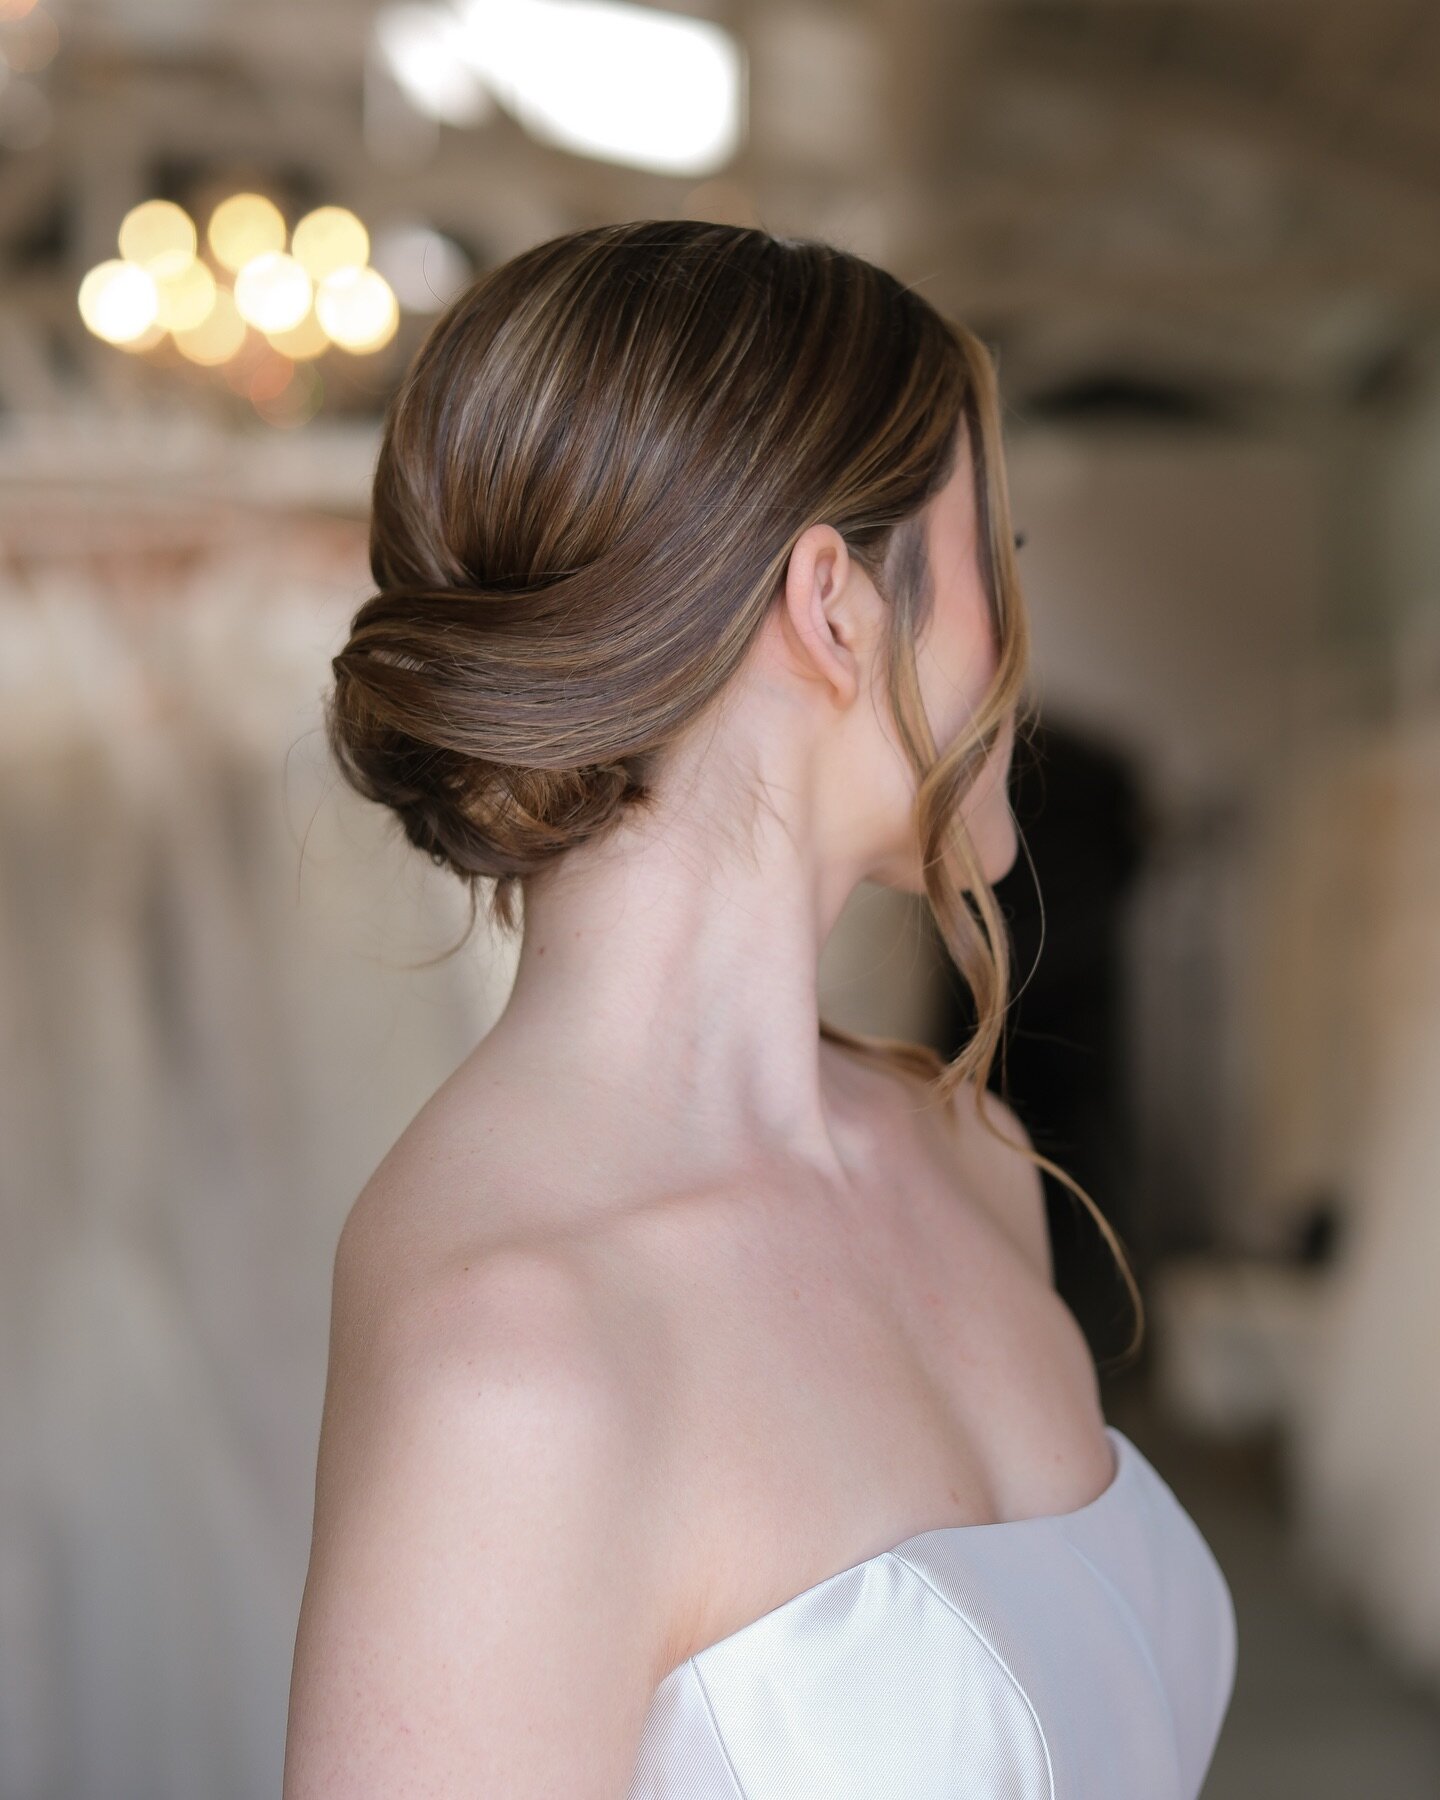 The classic bun is making a come back 
Hair Artist - Cristina 
Dress - @e.a.bridal 
Content @maddsmaxjesty @intentionalcreativesco 
#lysartistrypro #lysteam #lysmakeup #lyshair #losangelesmakeuoartist